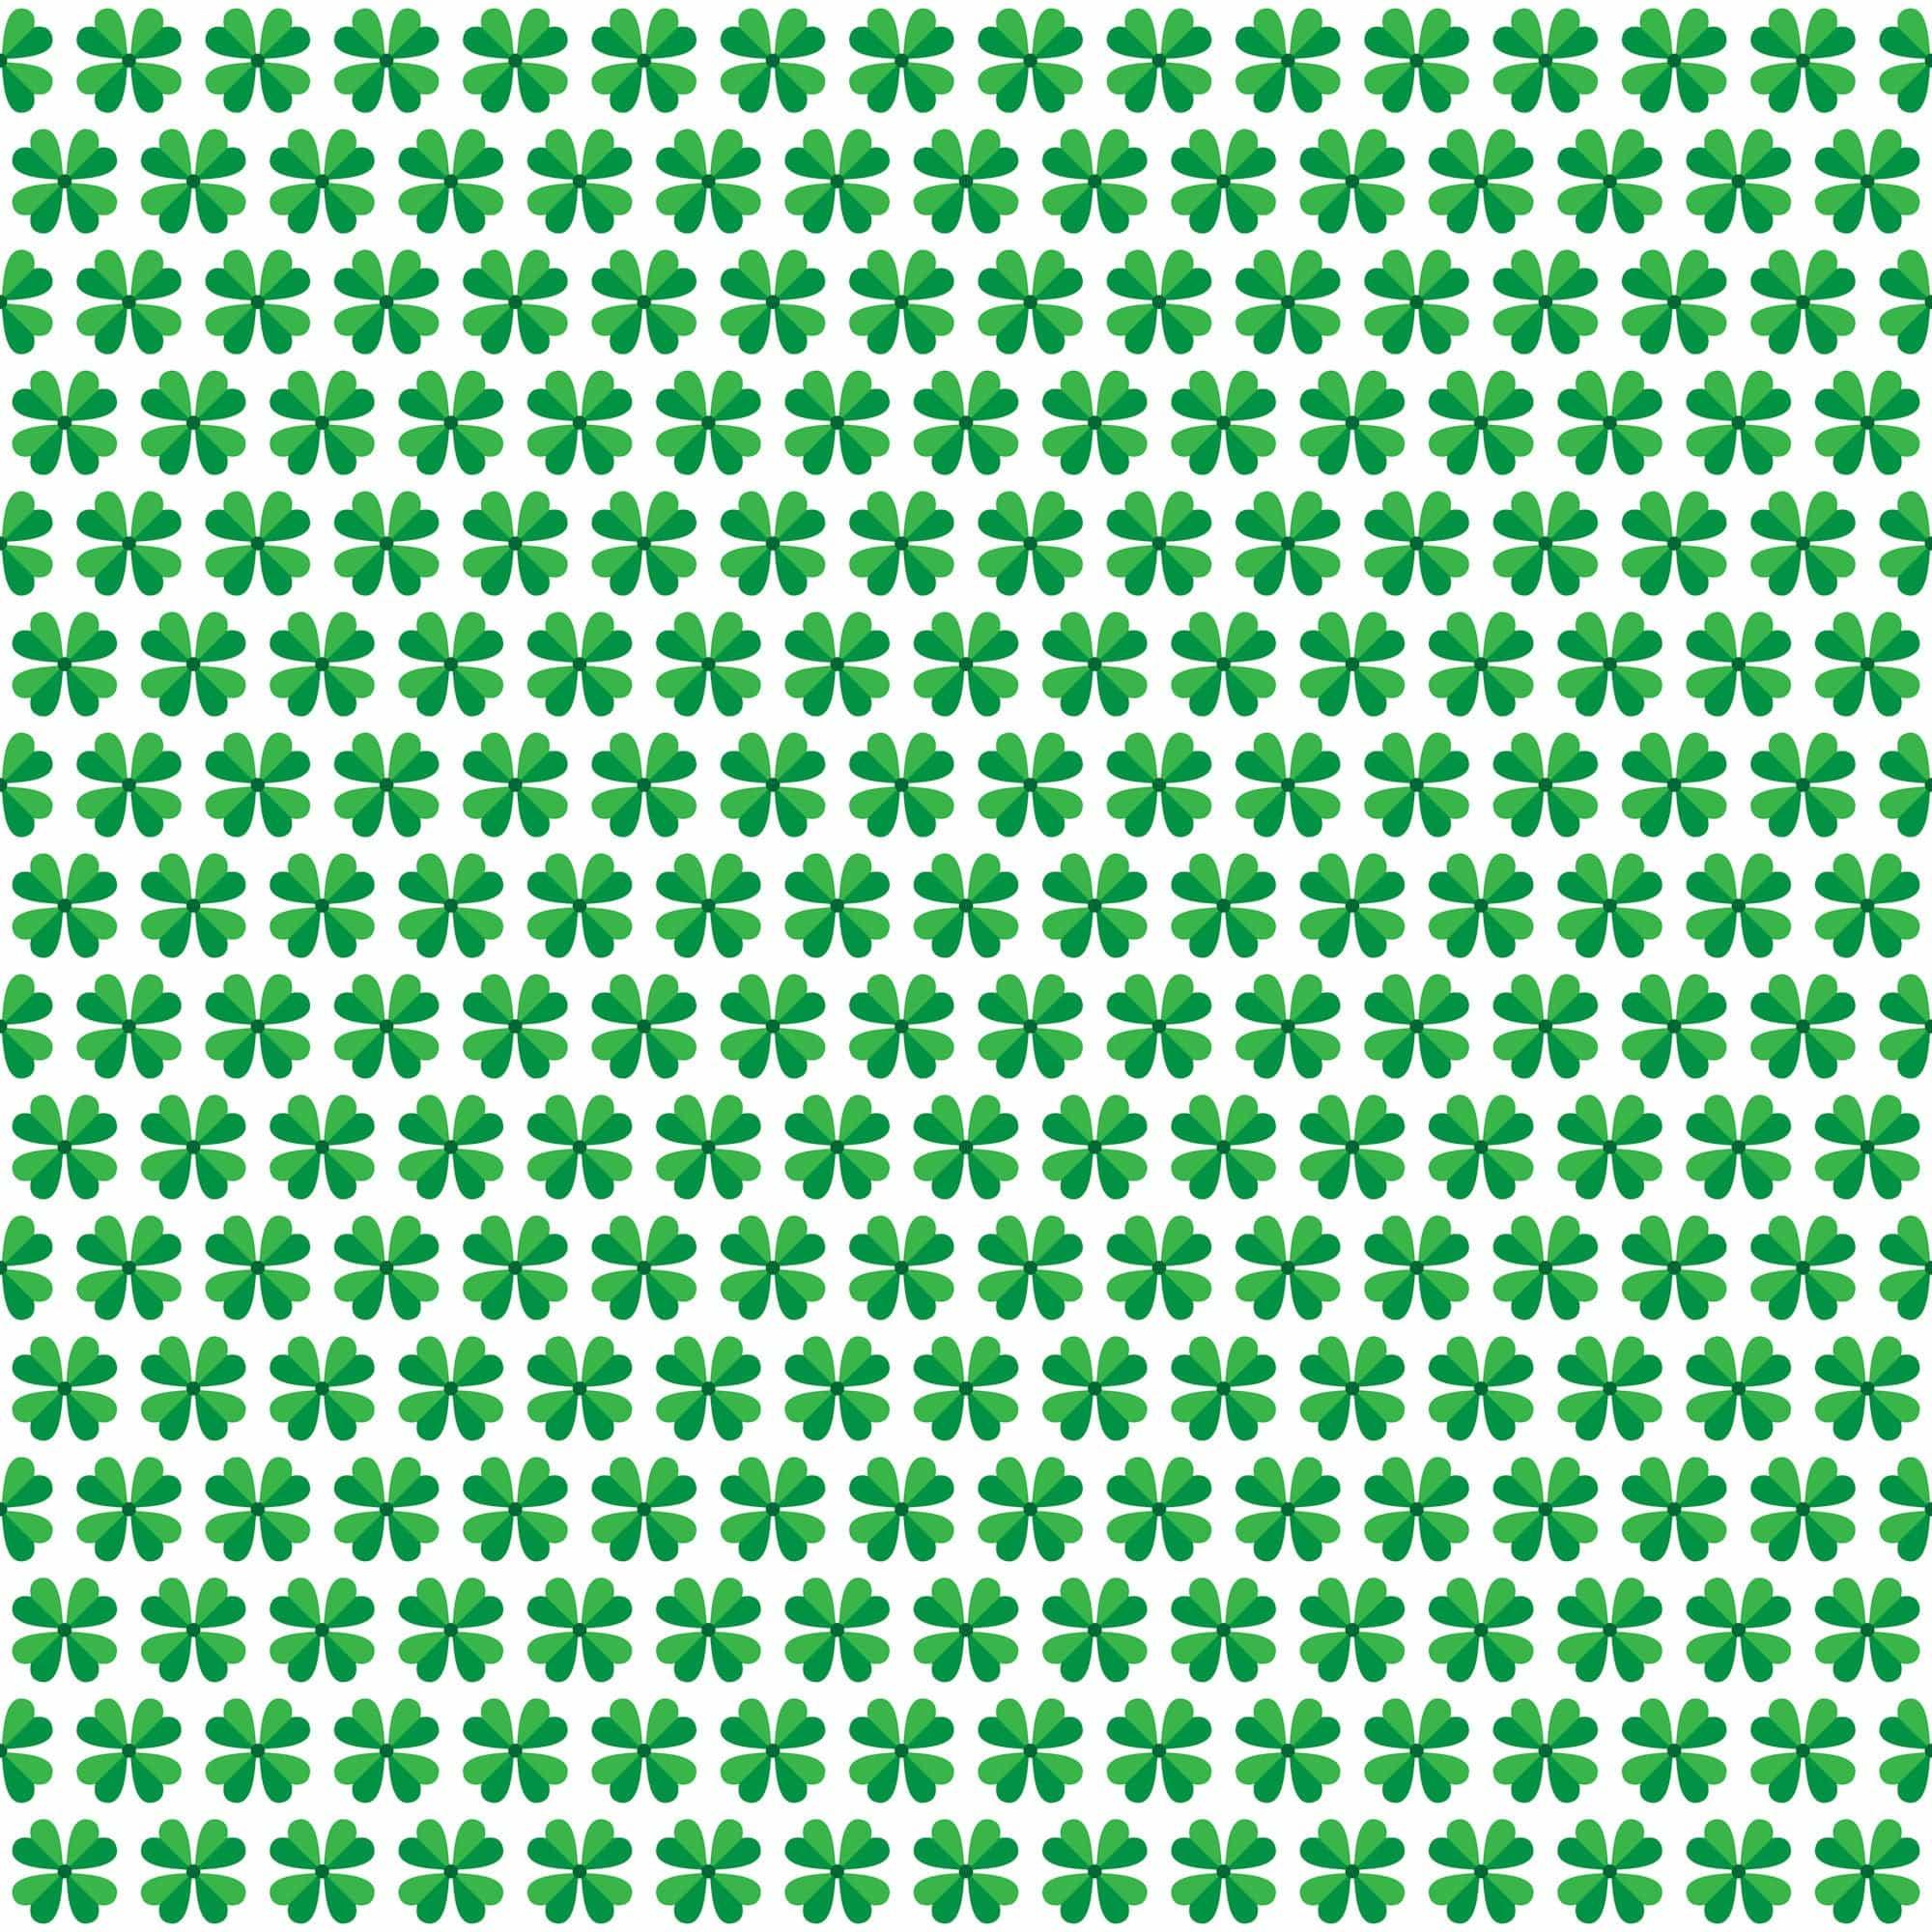 St. Pat's Traditional Collection Four Leaf Clovers 12 x 12 Double-Sided Scrapbook Paper by SSC Designs - Scrapbook Supply Companies